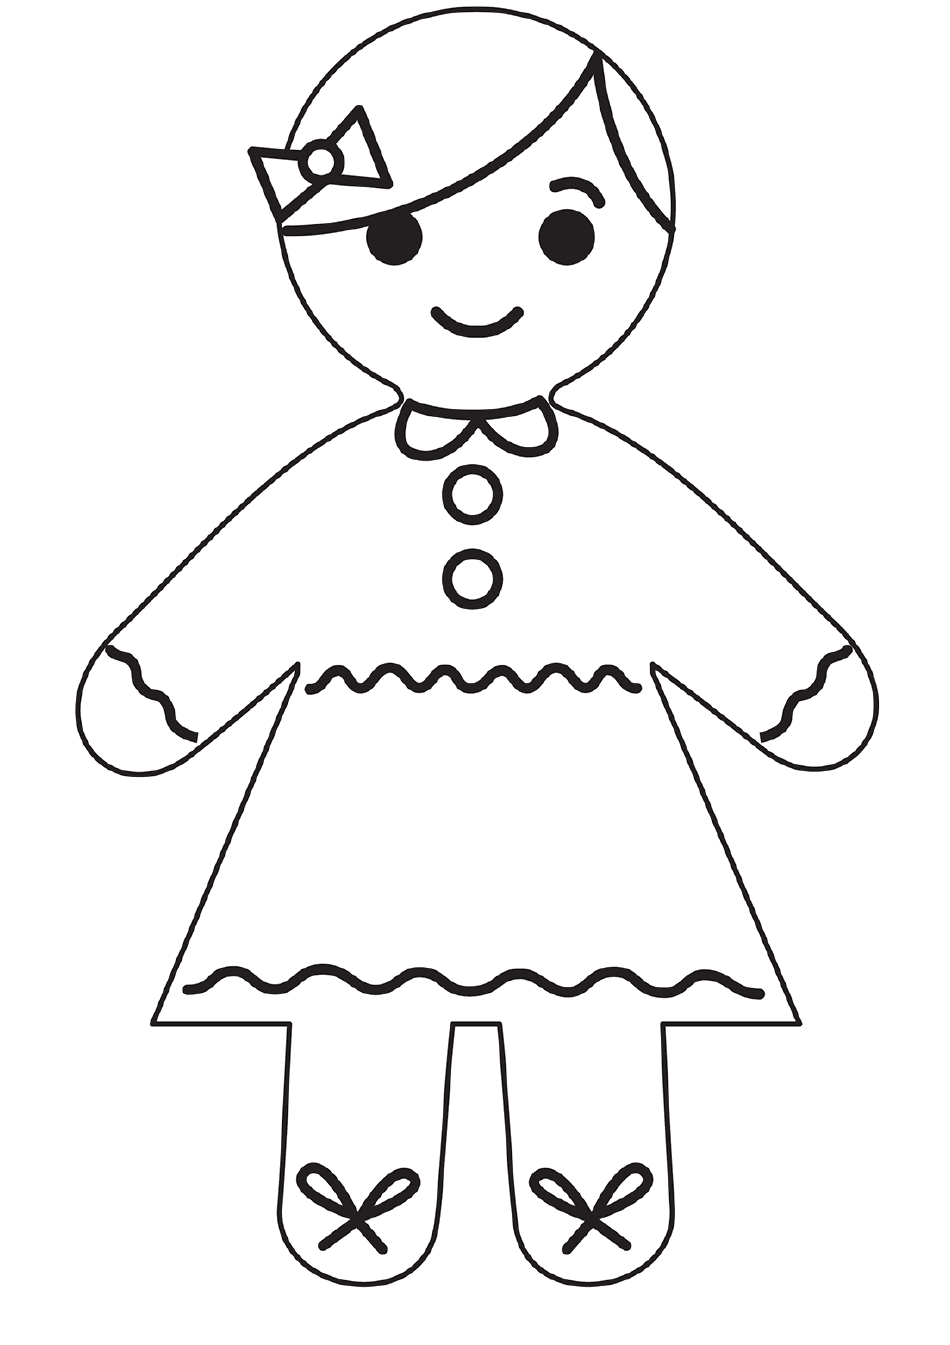 Gingerbread Girl Coloring Page, Page 1